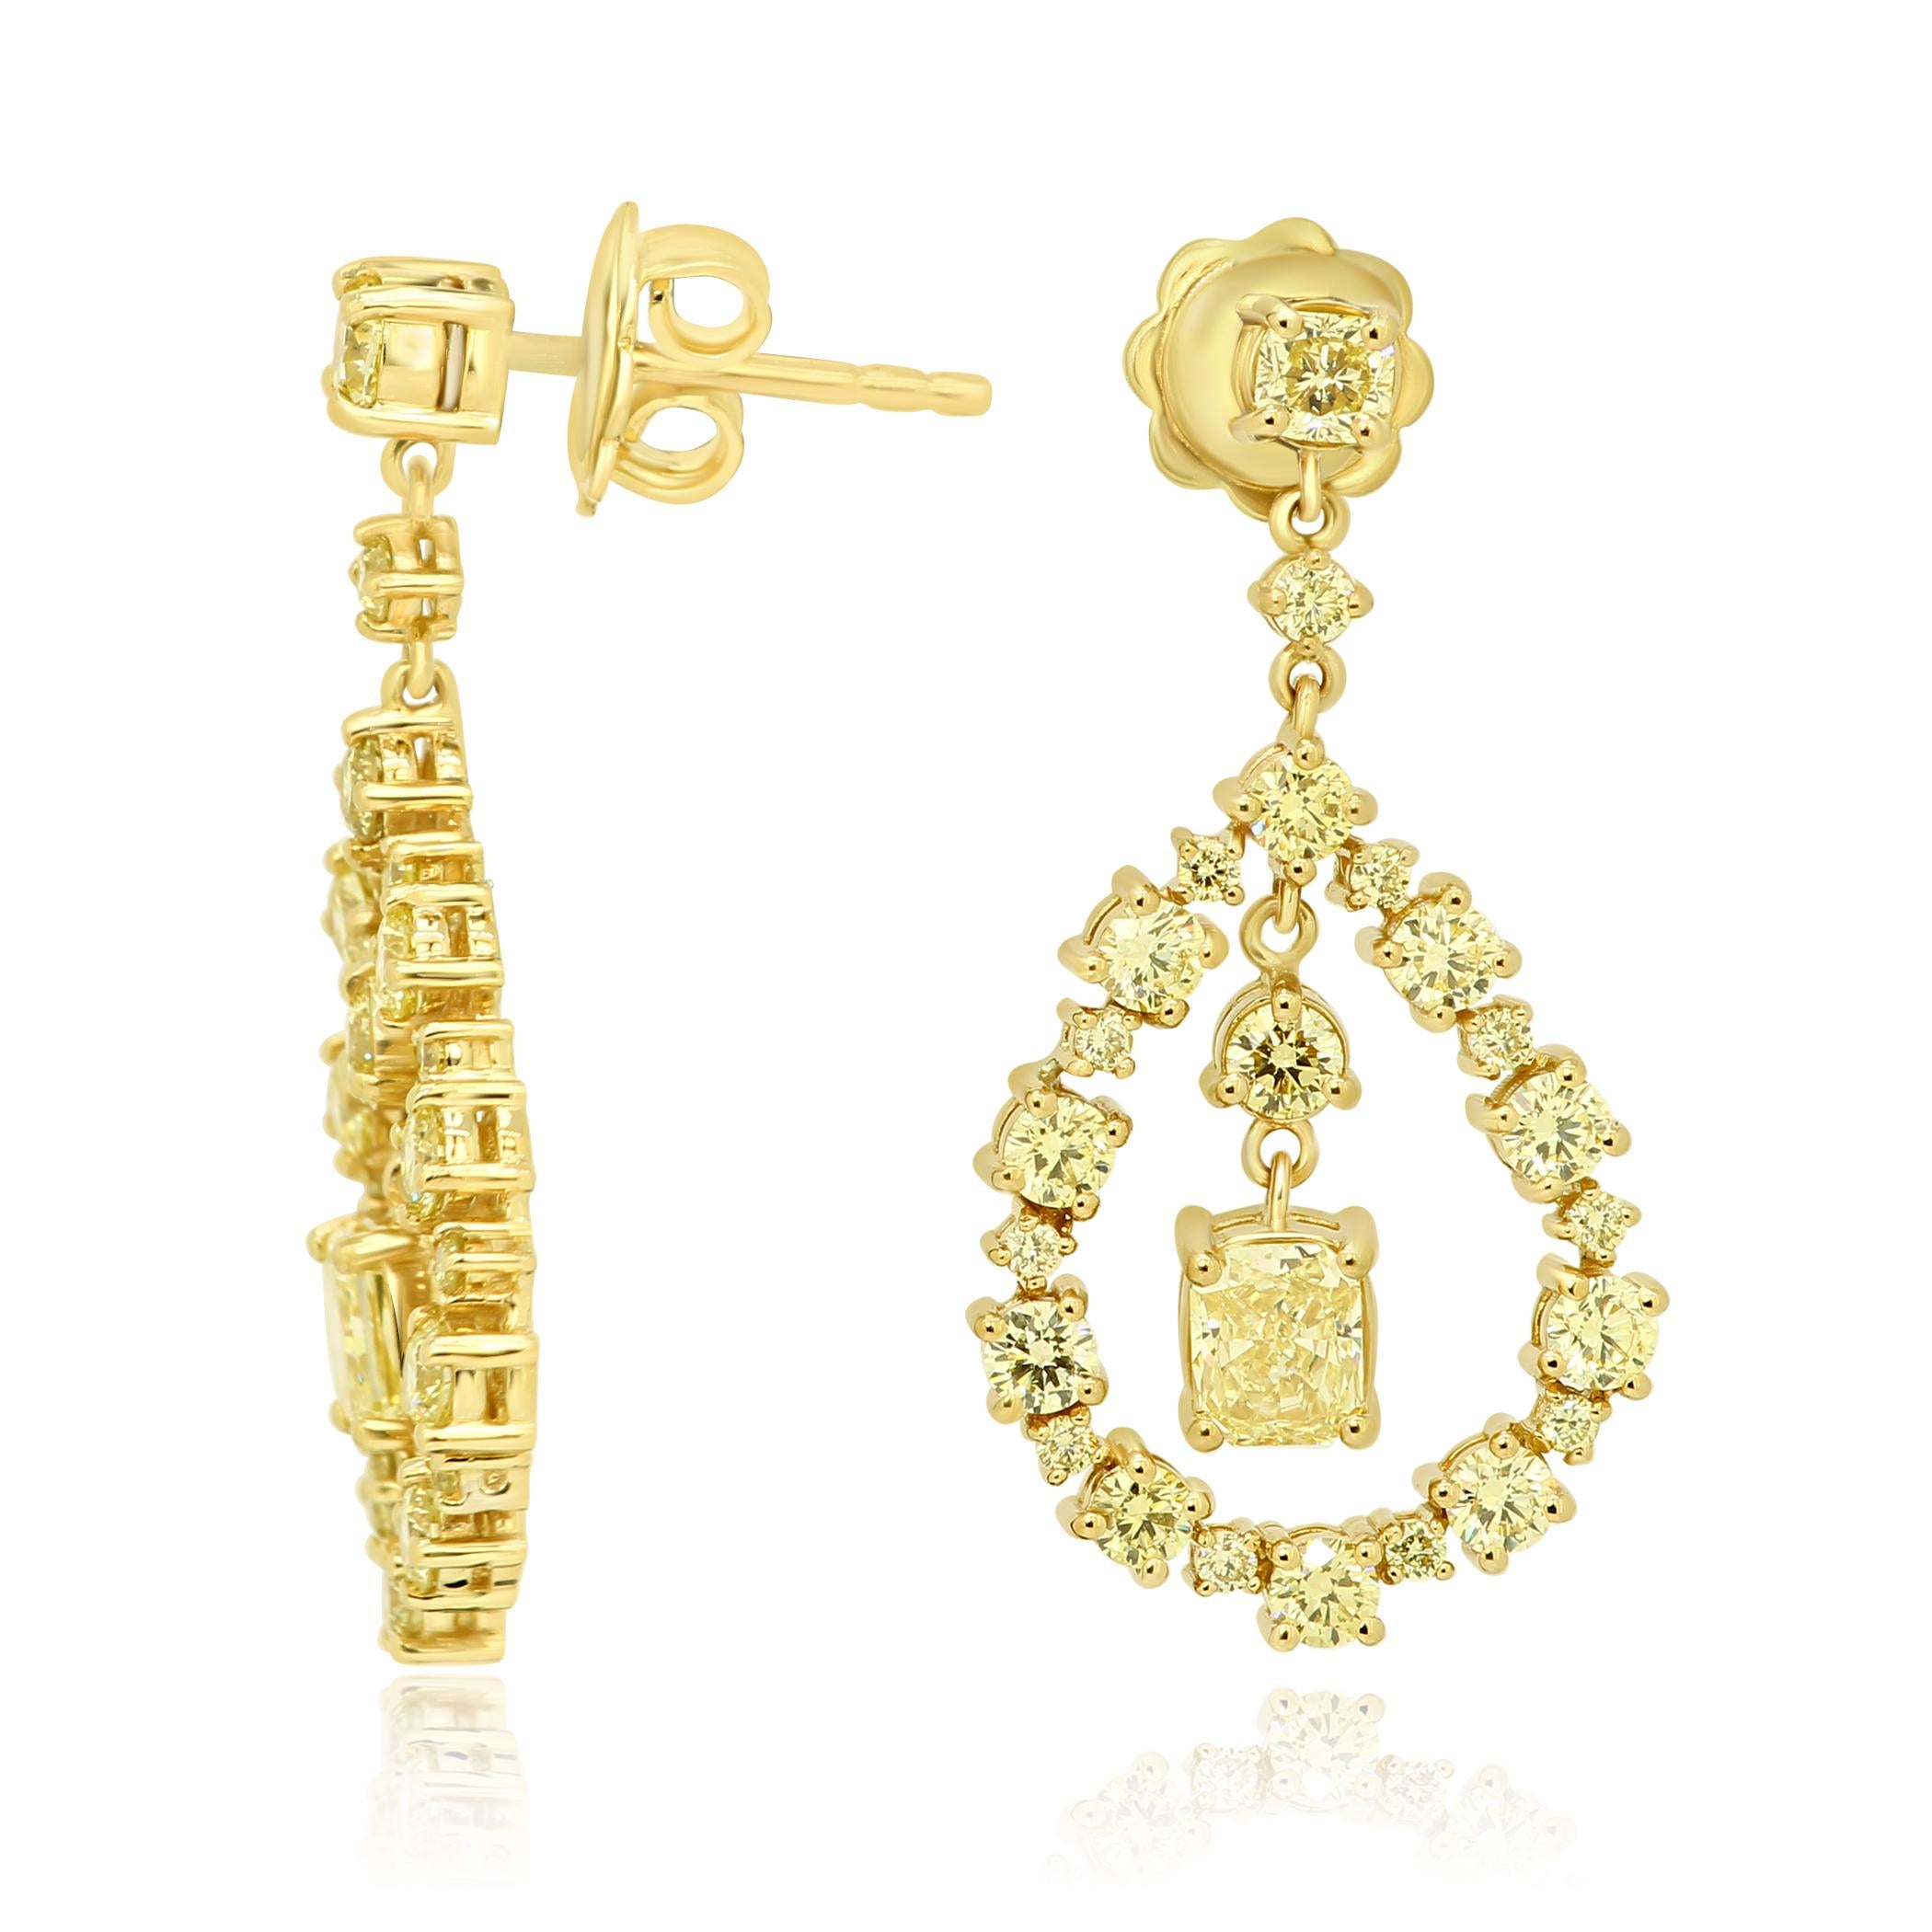 Gorgeous 14K Yellow Gold Drop Earrings set with 2 Natural Fancy Yellow Radiant cut VS Clarity Diamond 0.87 Carat and Natural Fancy Yellow Round Diamonds VS-SI Clarity 1.96 Carat.

Style available in different price ranges. Prices are based on your